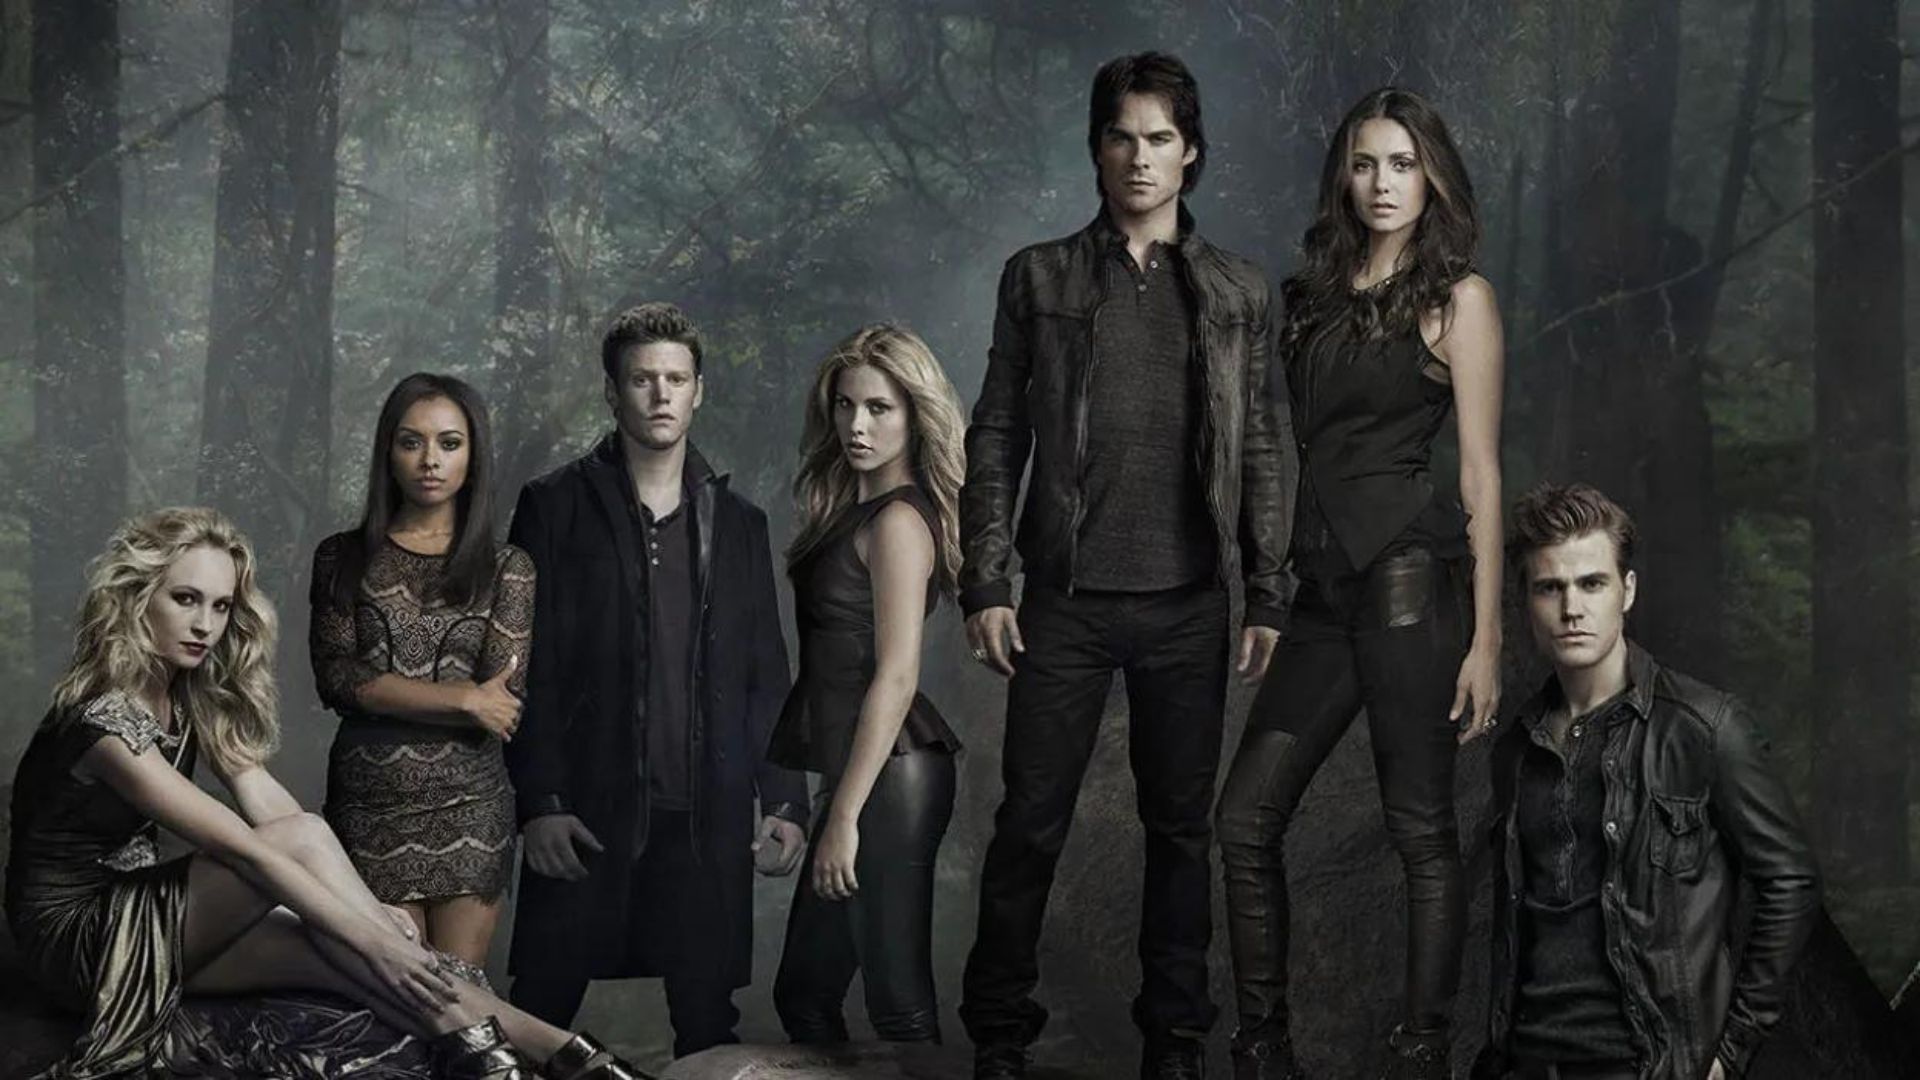 Is The Vampire Diaries Season 9 Officially Approved Or Still Uncertain?